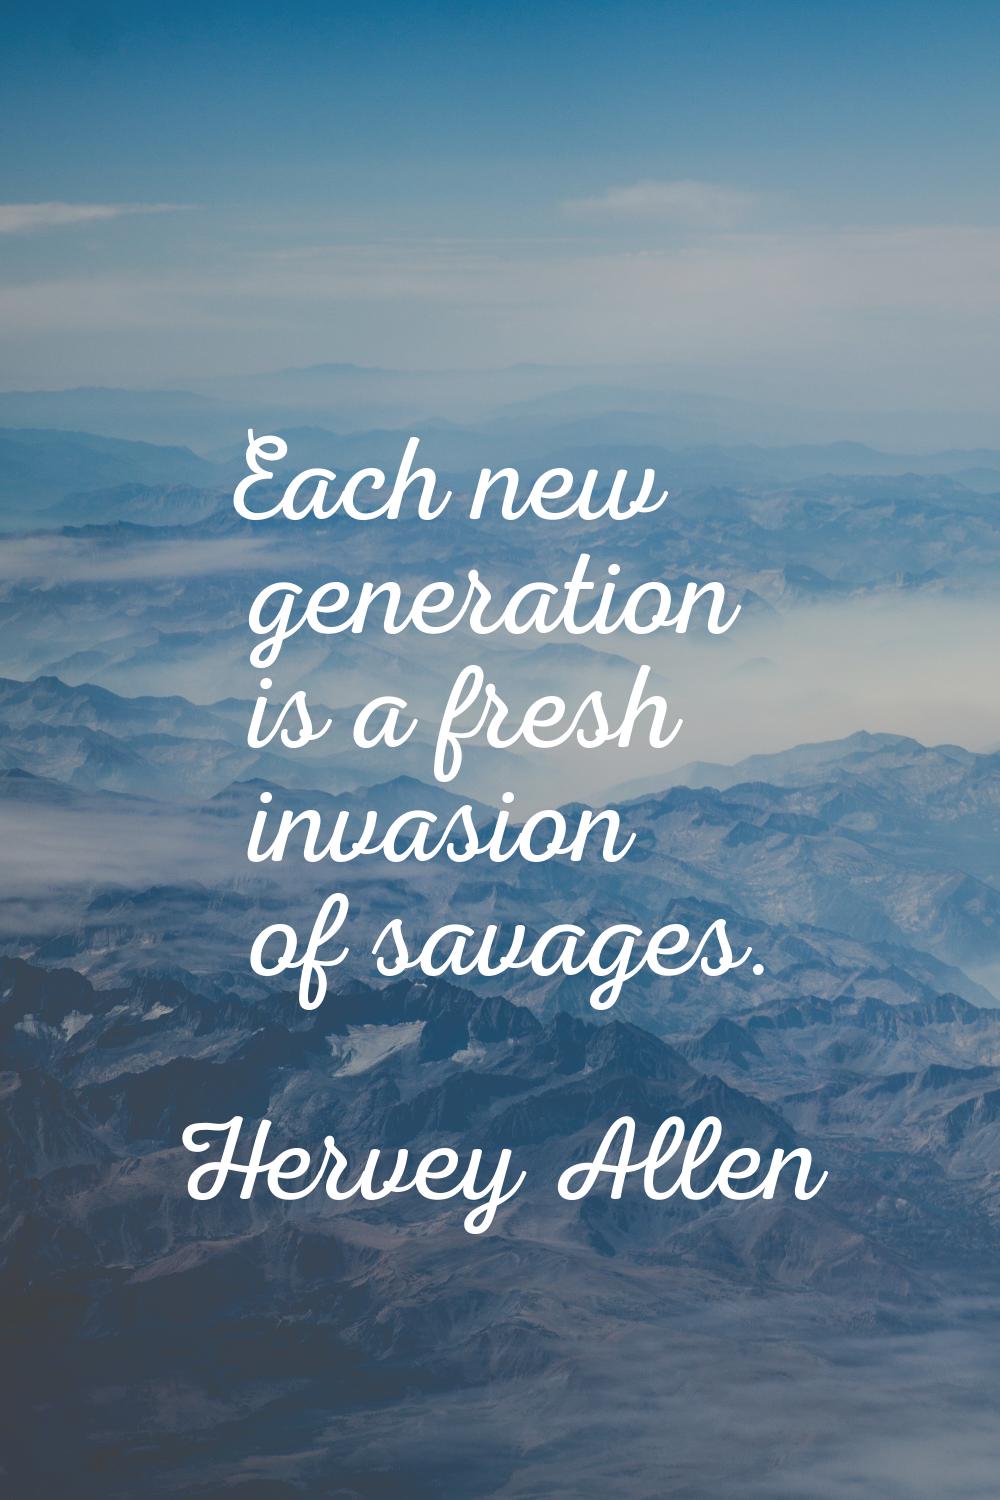 Each new generation is a fresh invasion of savages.